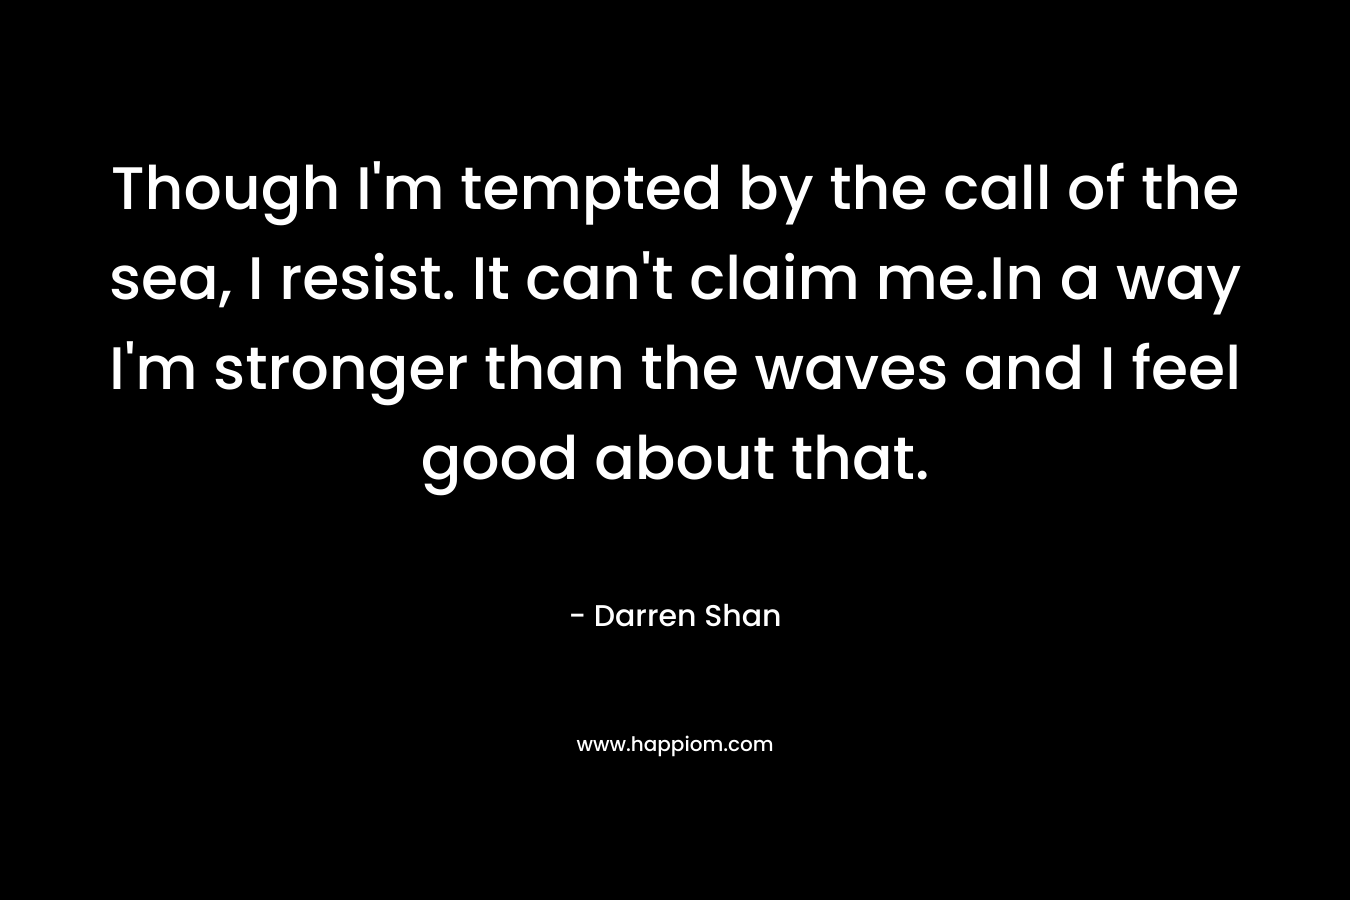 Though I’m tempted by the call of the sea, I resist. It can’t claim me.In a way I’m stronger than the waves and I feel good about that. – Darren Shan